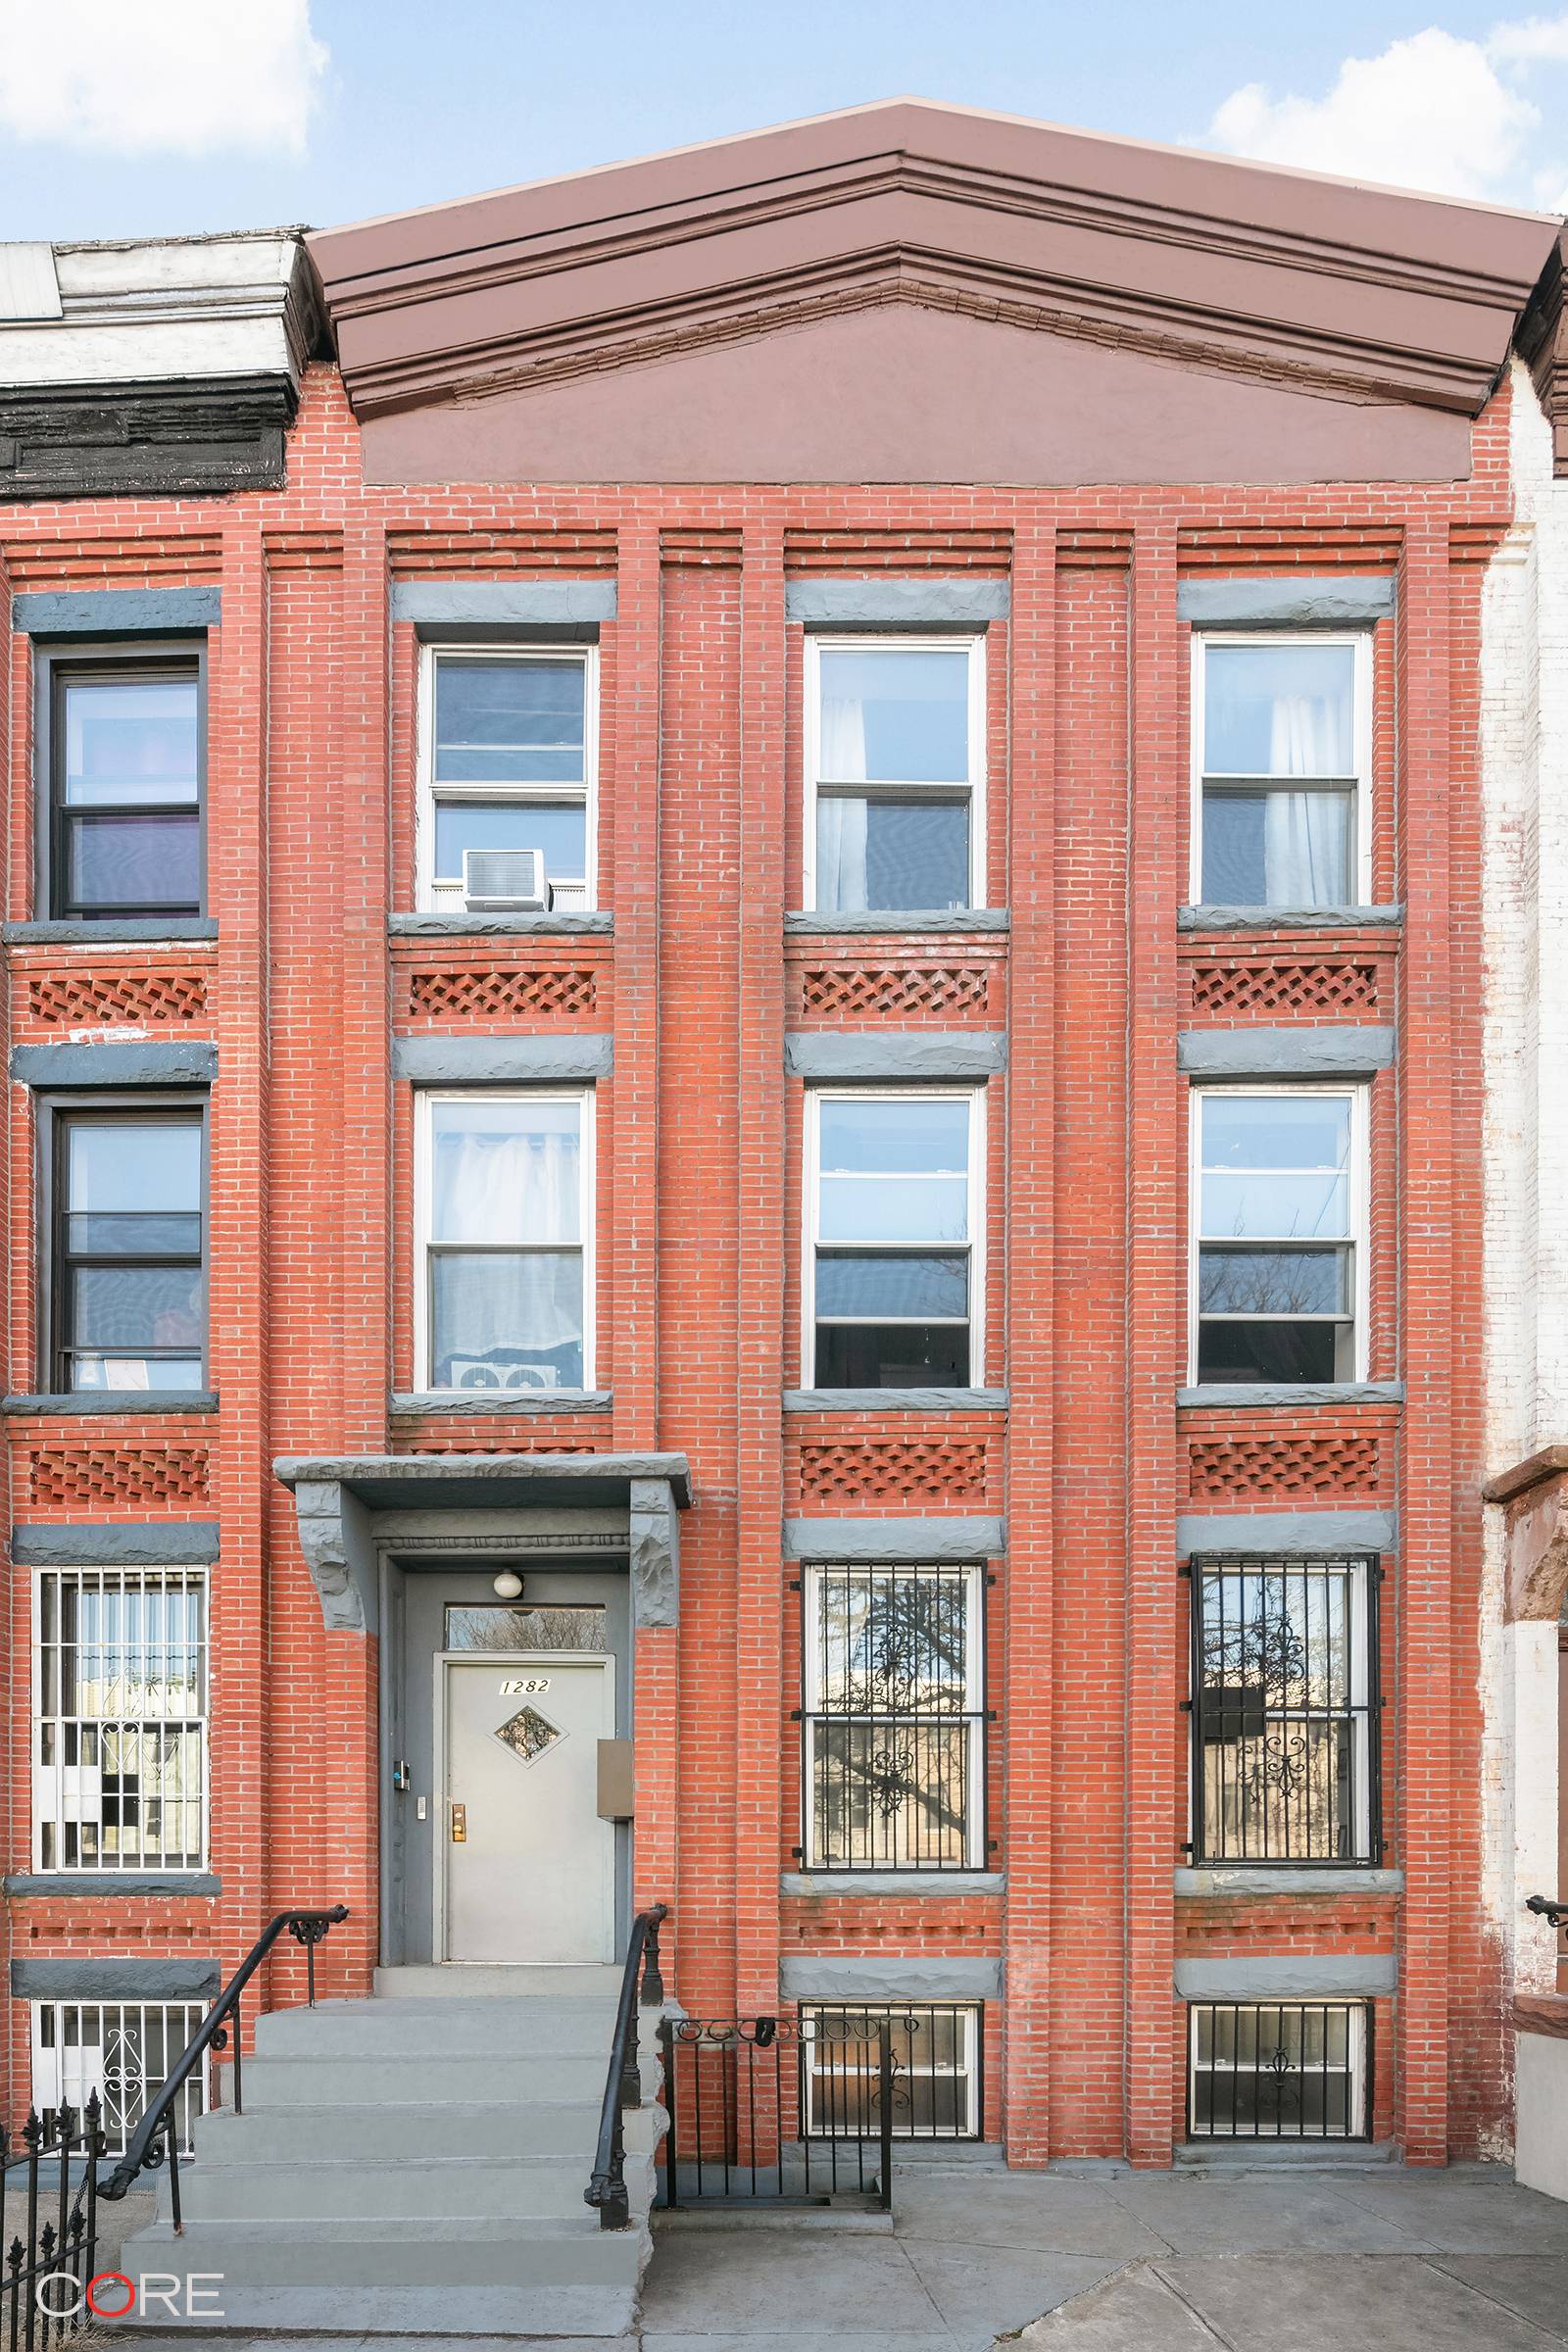 Welcome to 1282 Bushwick Avenue, a contemporary 20 foot wide, three unit multi family townhouse in the heart of Bushwick.